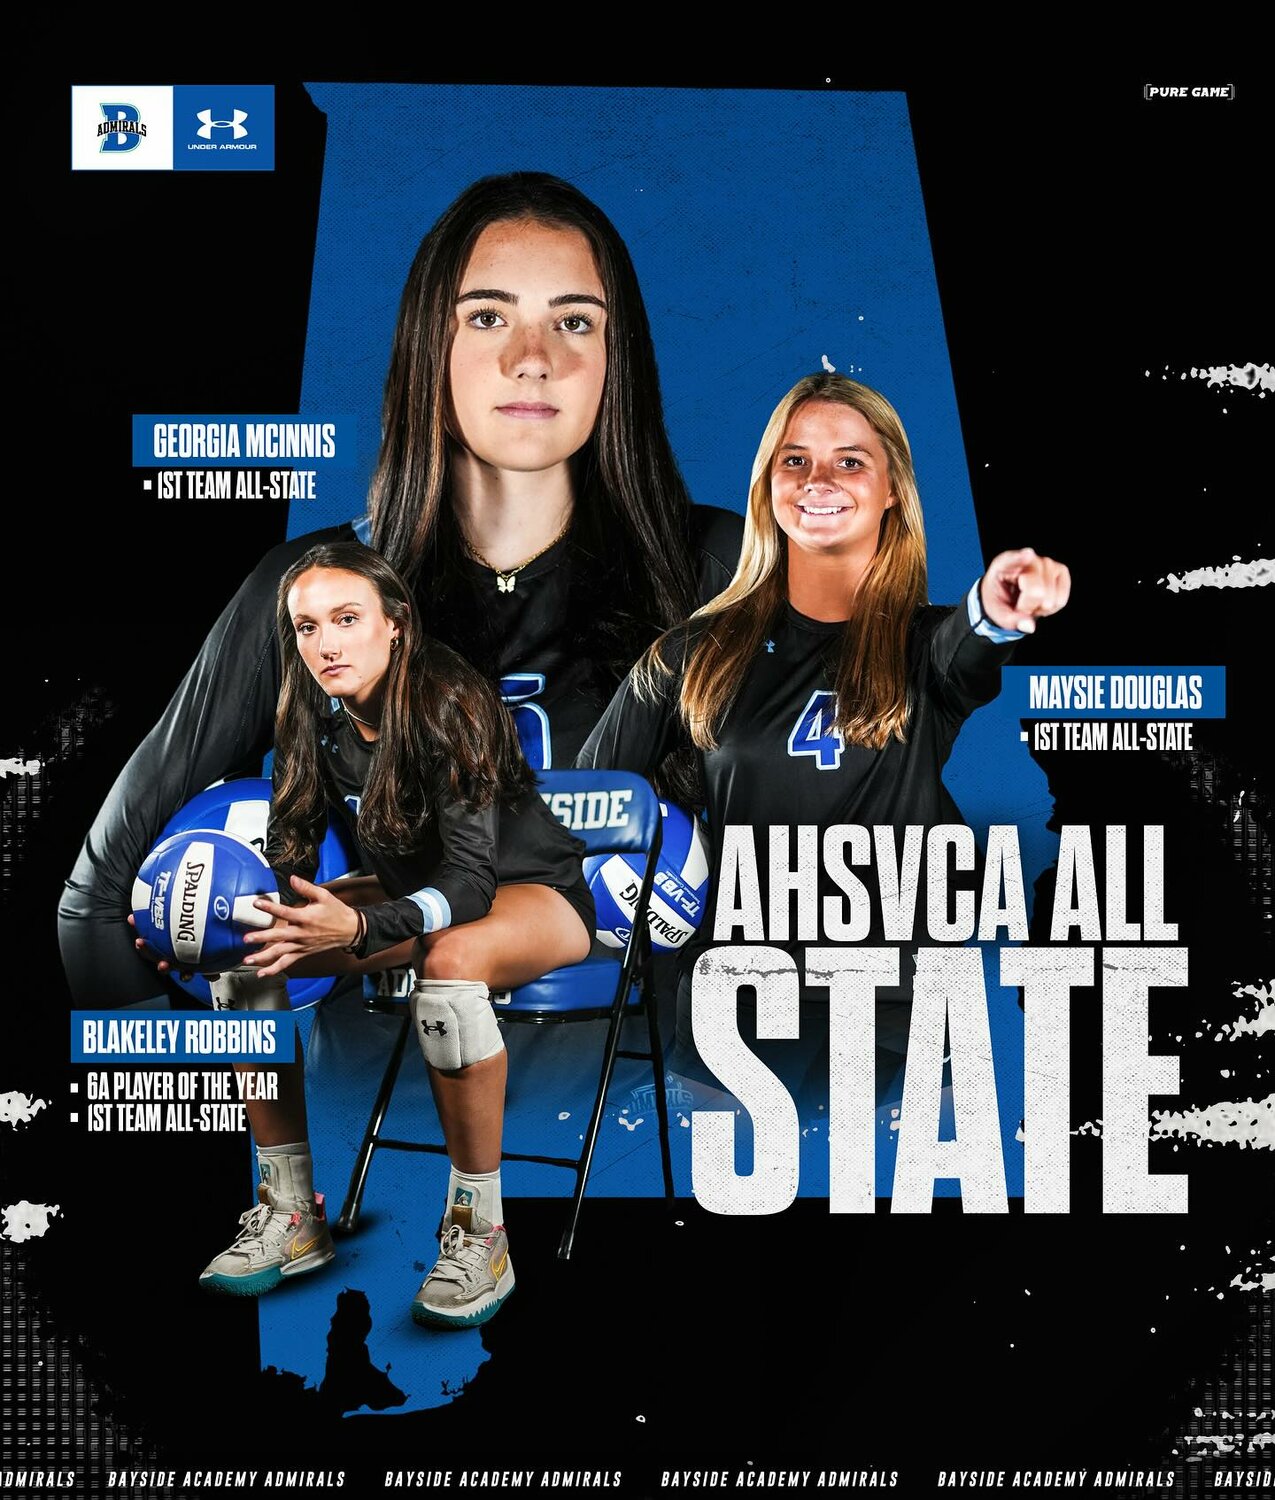 Three Bayside Academy Admirals were represented on the Alabama High School Volleyball Coaches Association’s first-team all-state for Class 6A. Blakeley Robbins, who was also named the classification’s player of the year, was recognized alongside Georgia McInnis and Maysie Douglas.